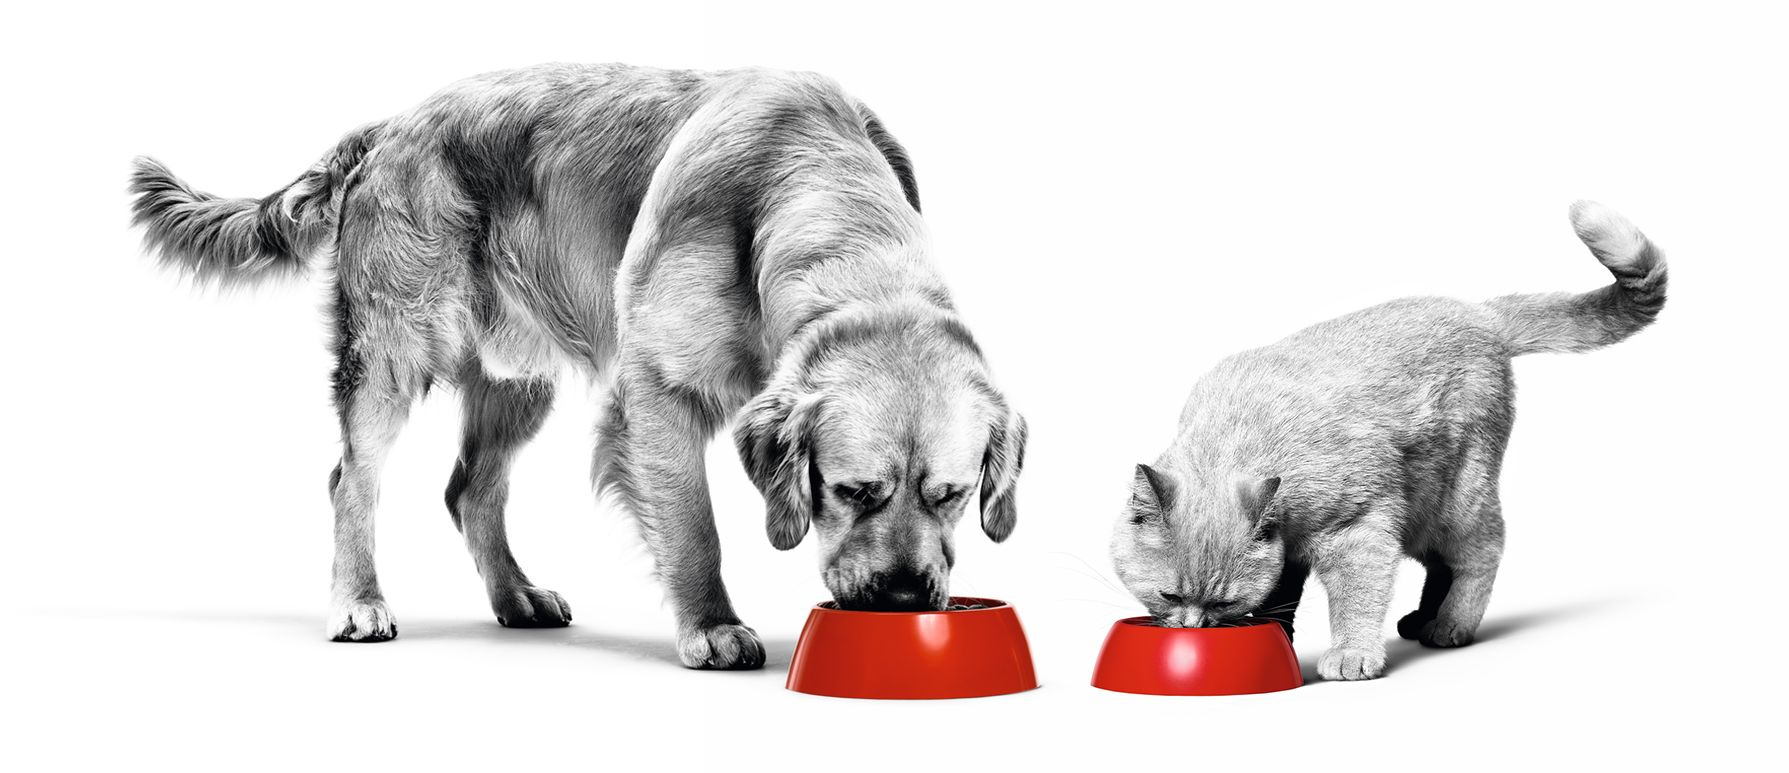 Labrador Retriever and British Shorthair adults eating from red bowls in black and white on a white background